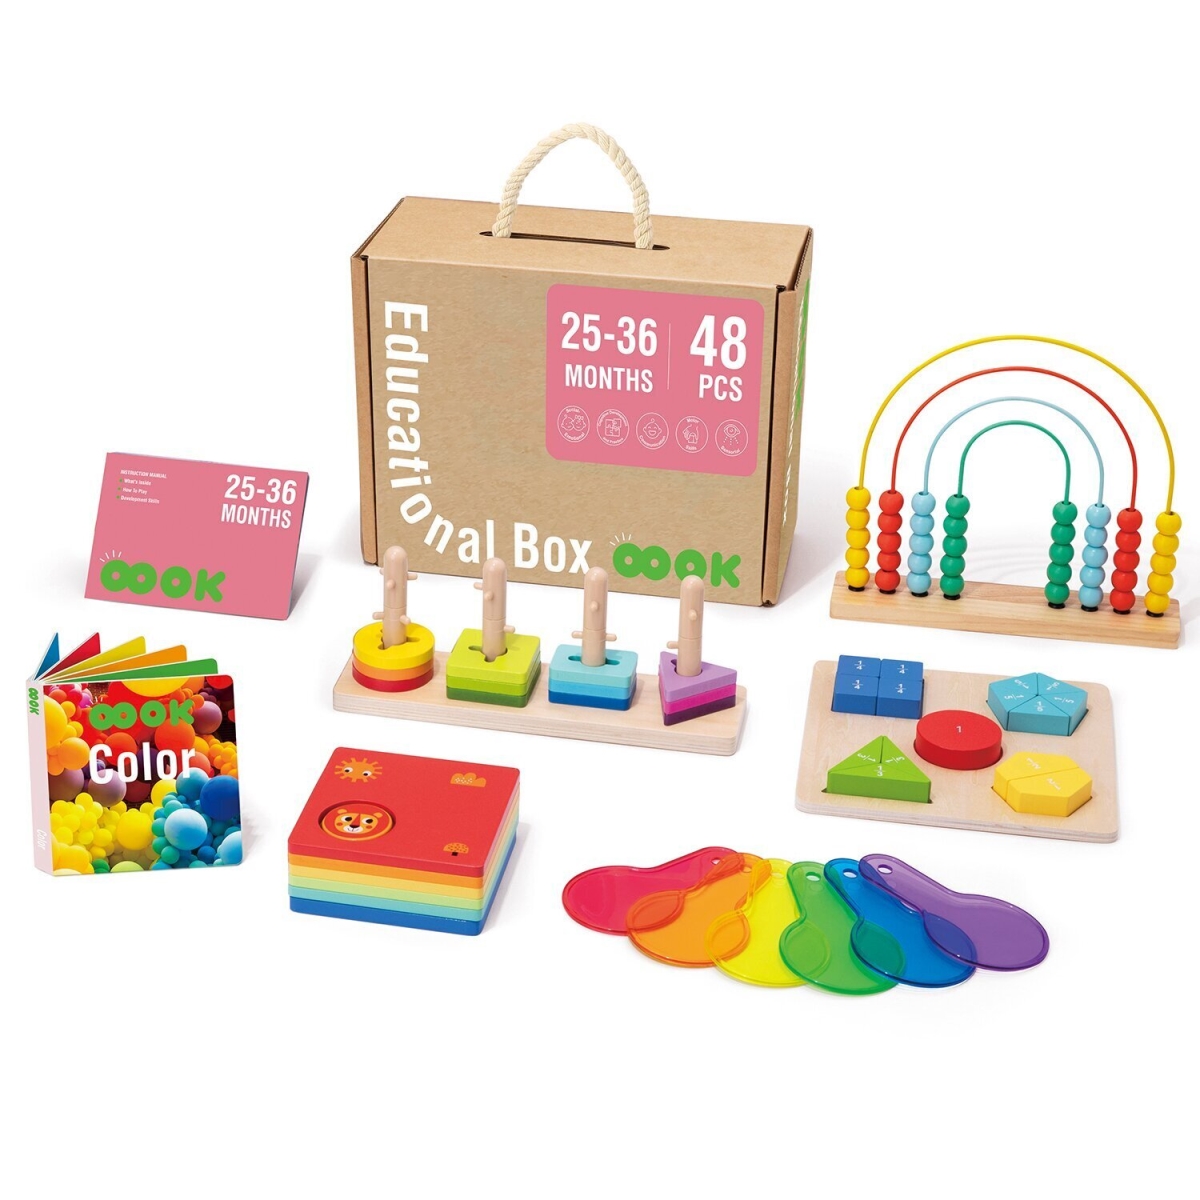 Picture of Tooky Toy 300582 32 x 27 x 18 cm 25-36 Months Educational Box